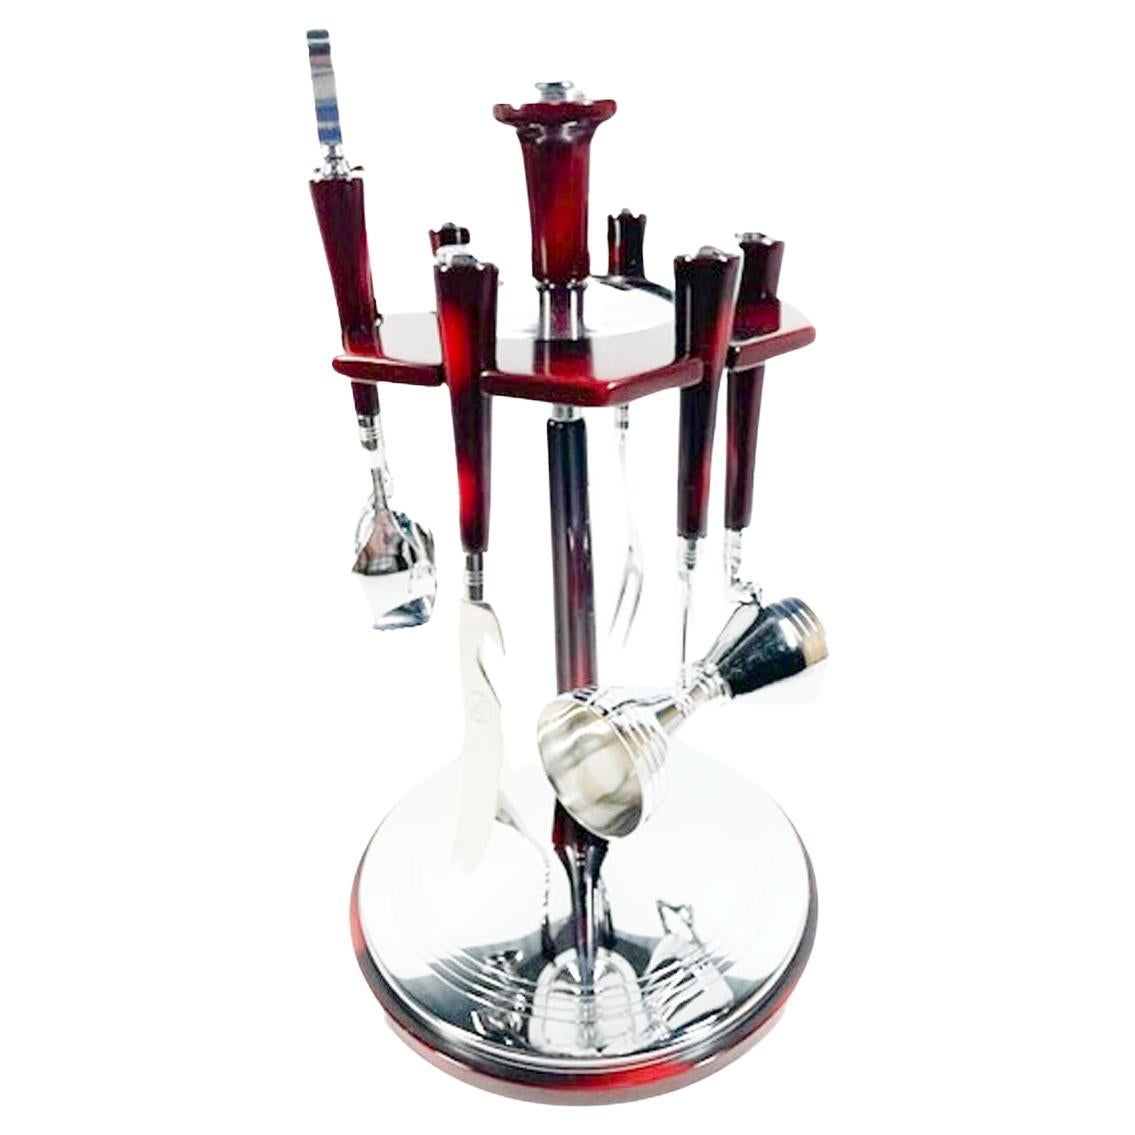 Glo-Hill 6 Piece Bar Tool Set with Carousel Stand in Cherry Bakelite and Chrome For Sale